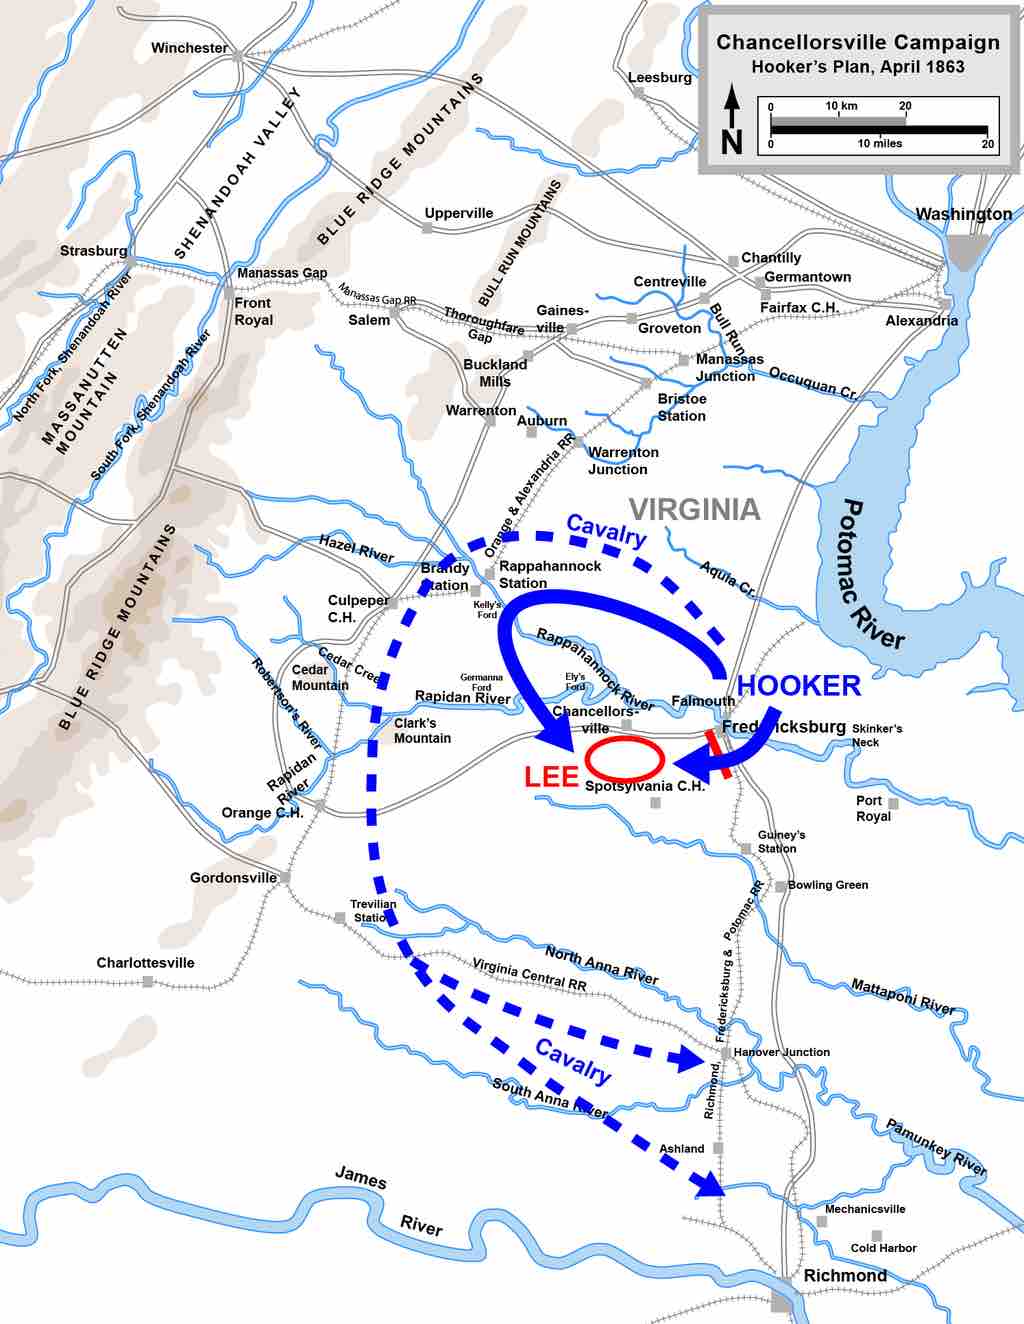 Hooker's plan for the Chancellorsville Campaign